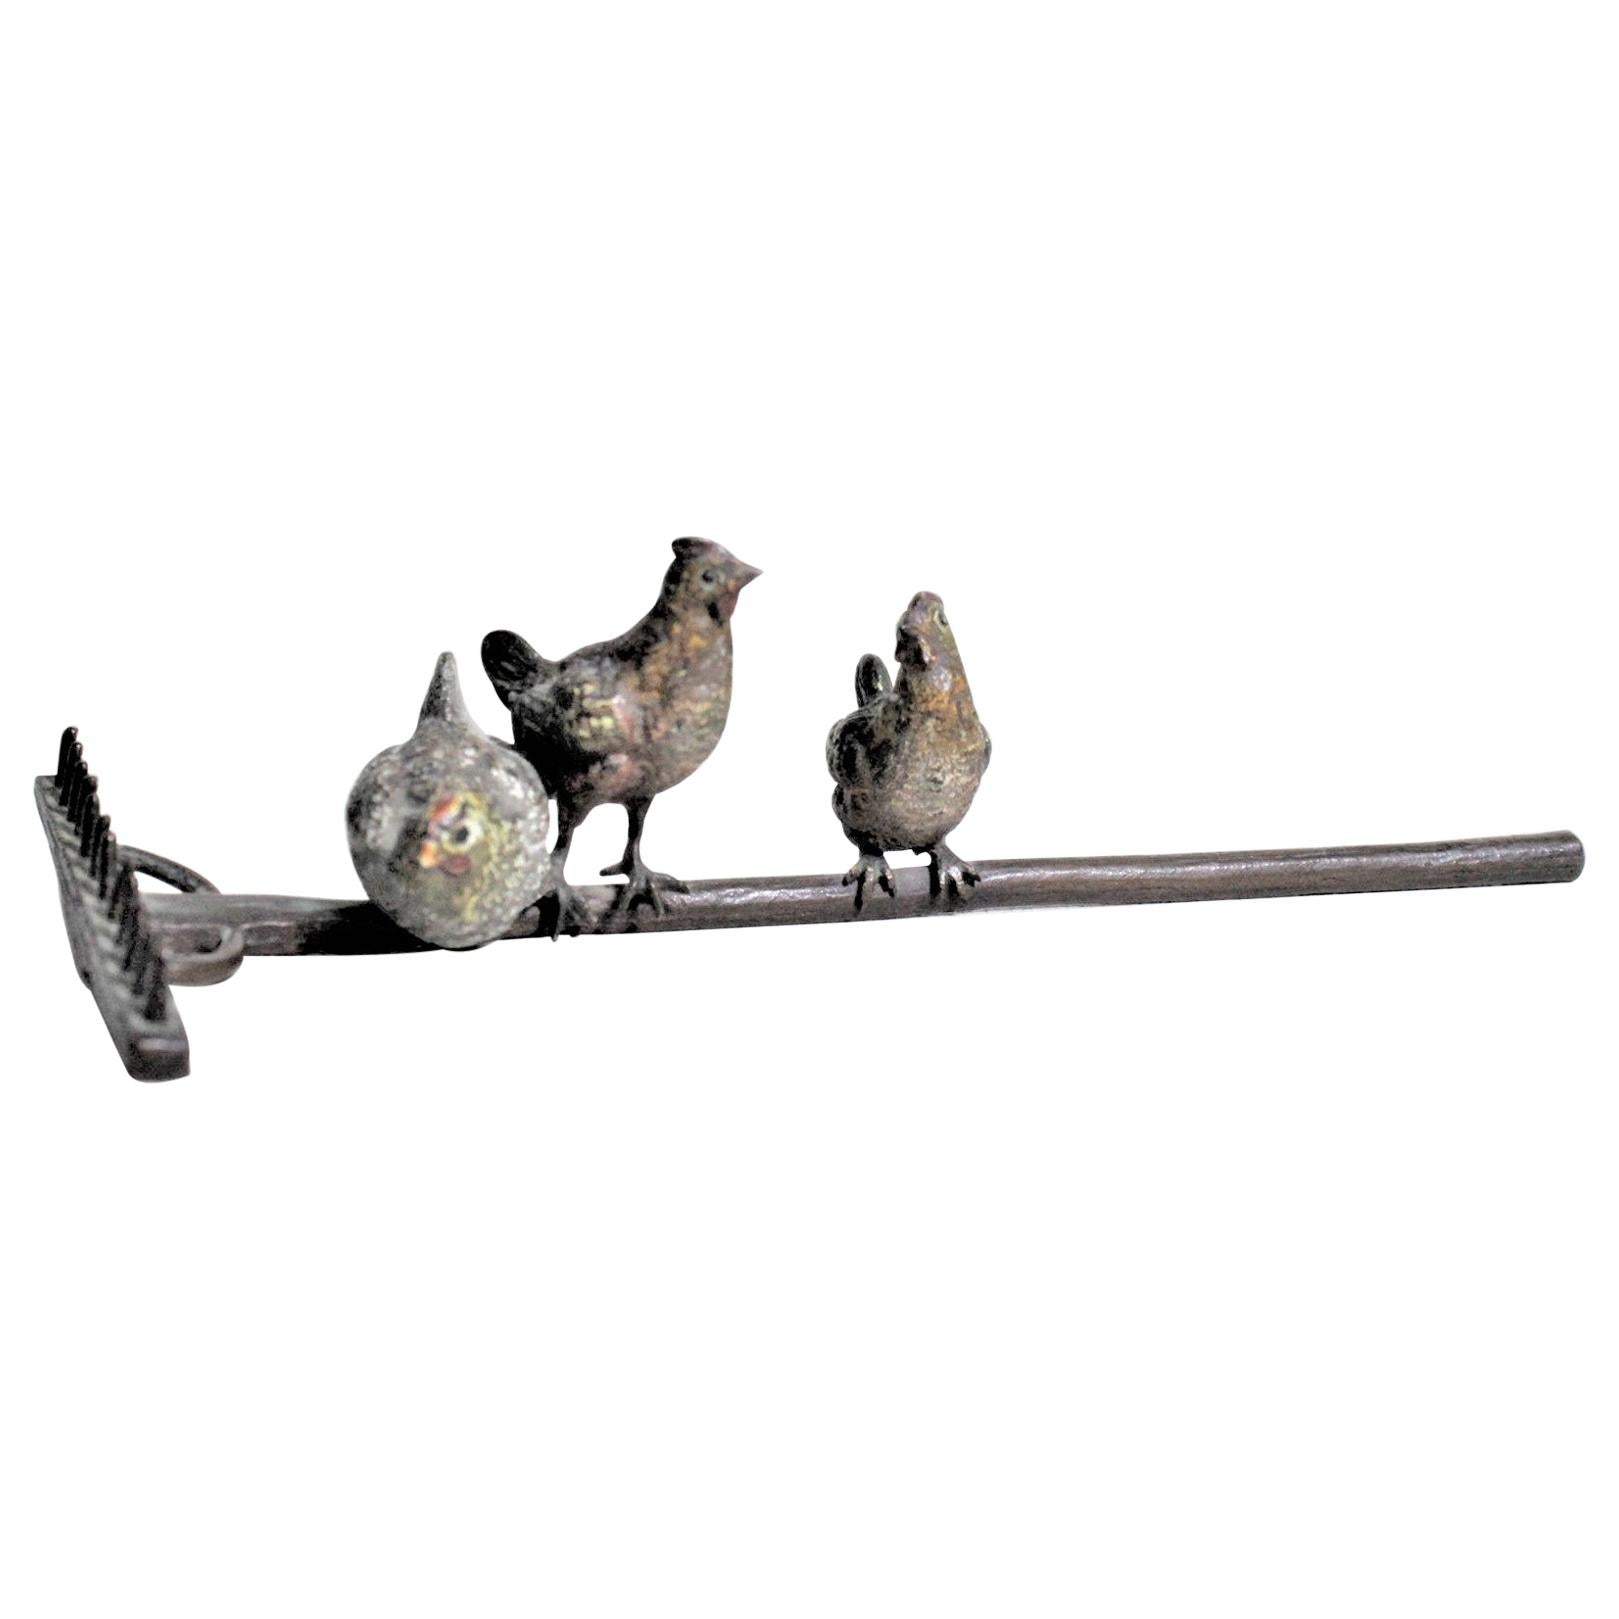 Antique Austrian Cold-Painted Bronze of Chickens Perched on a Rake Sculpture